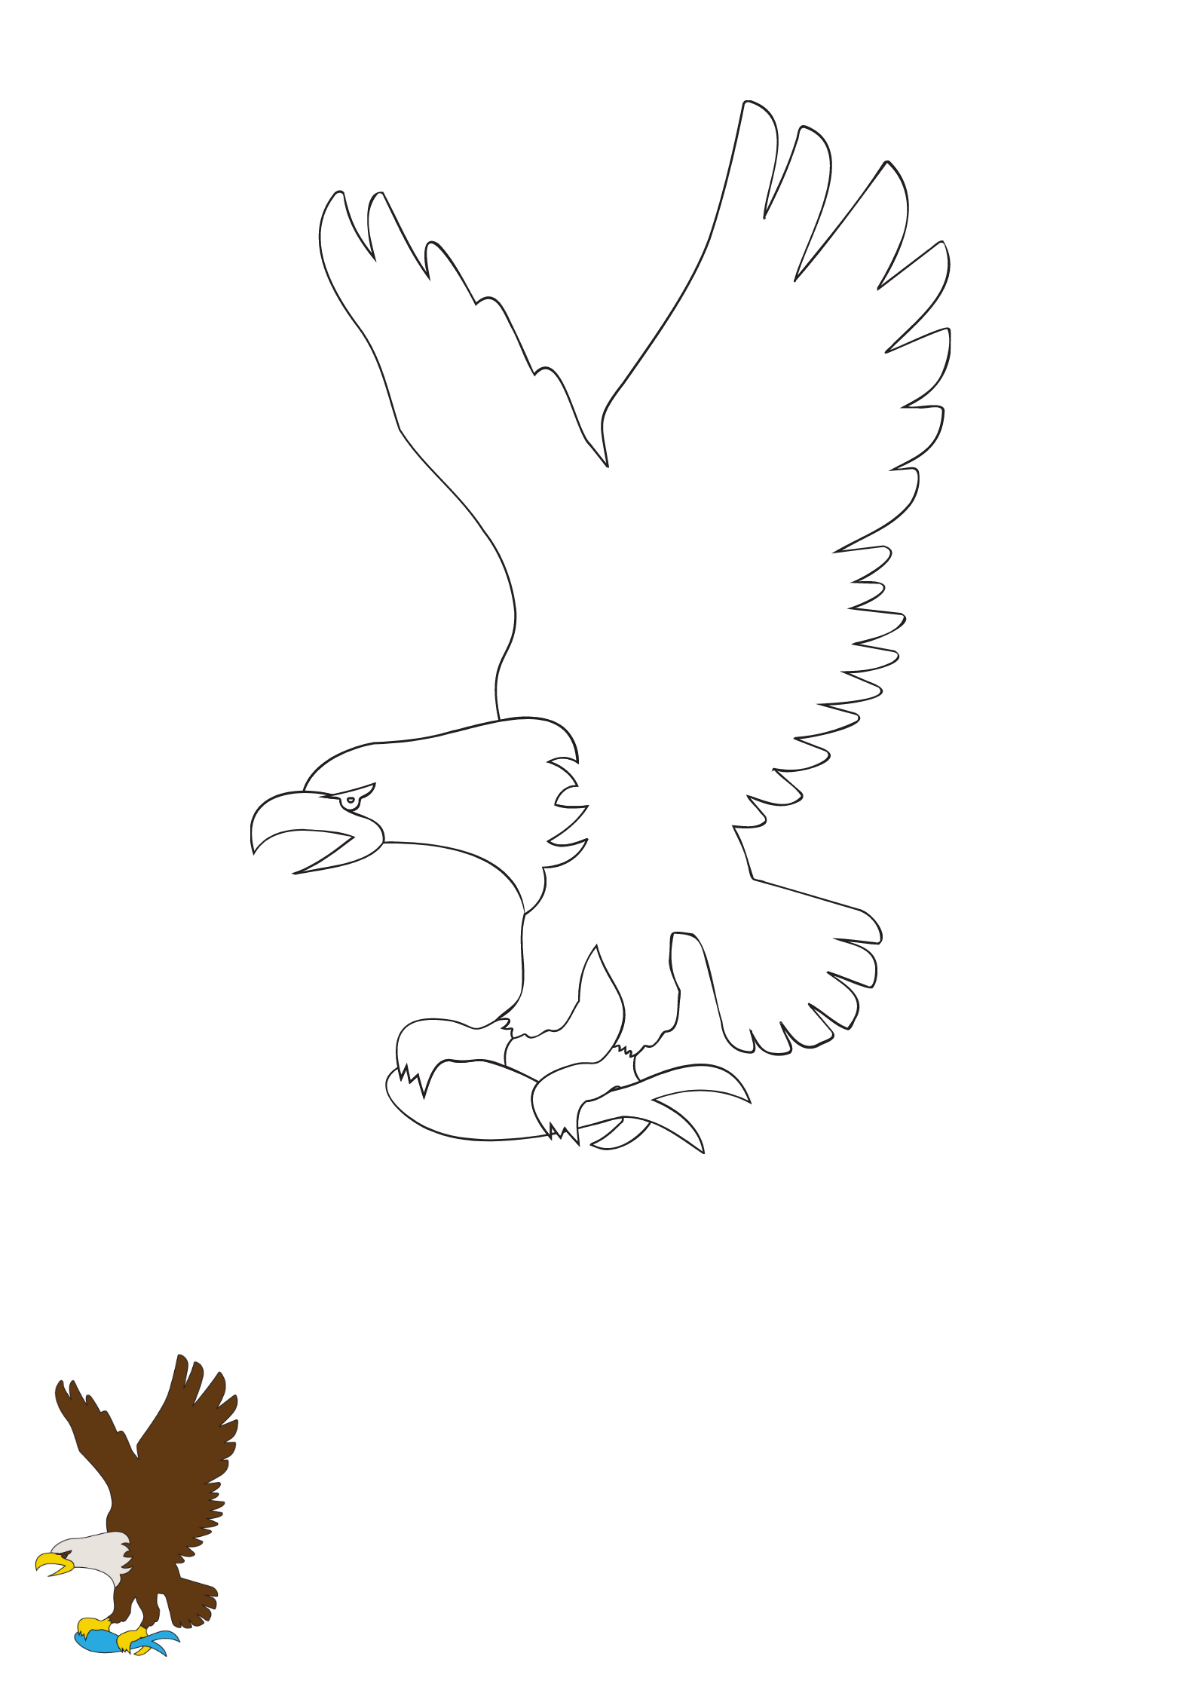 Eating Eagle coloring page Template